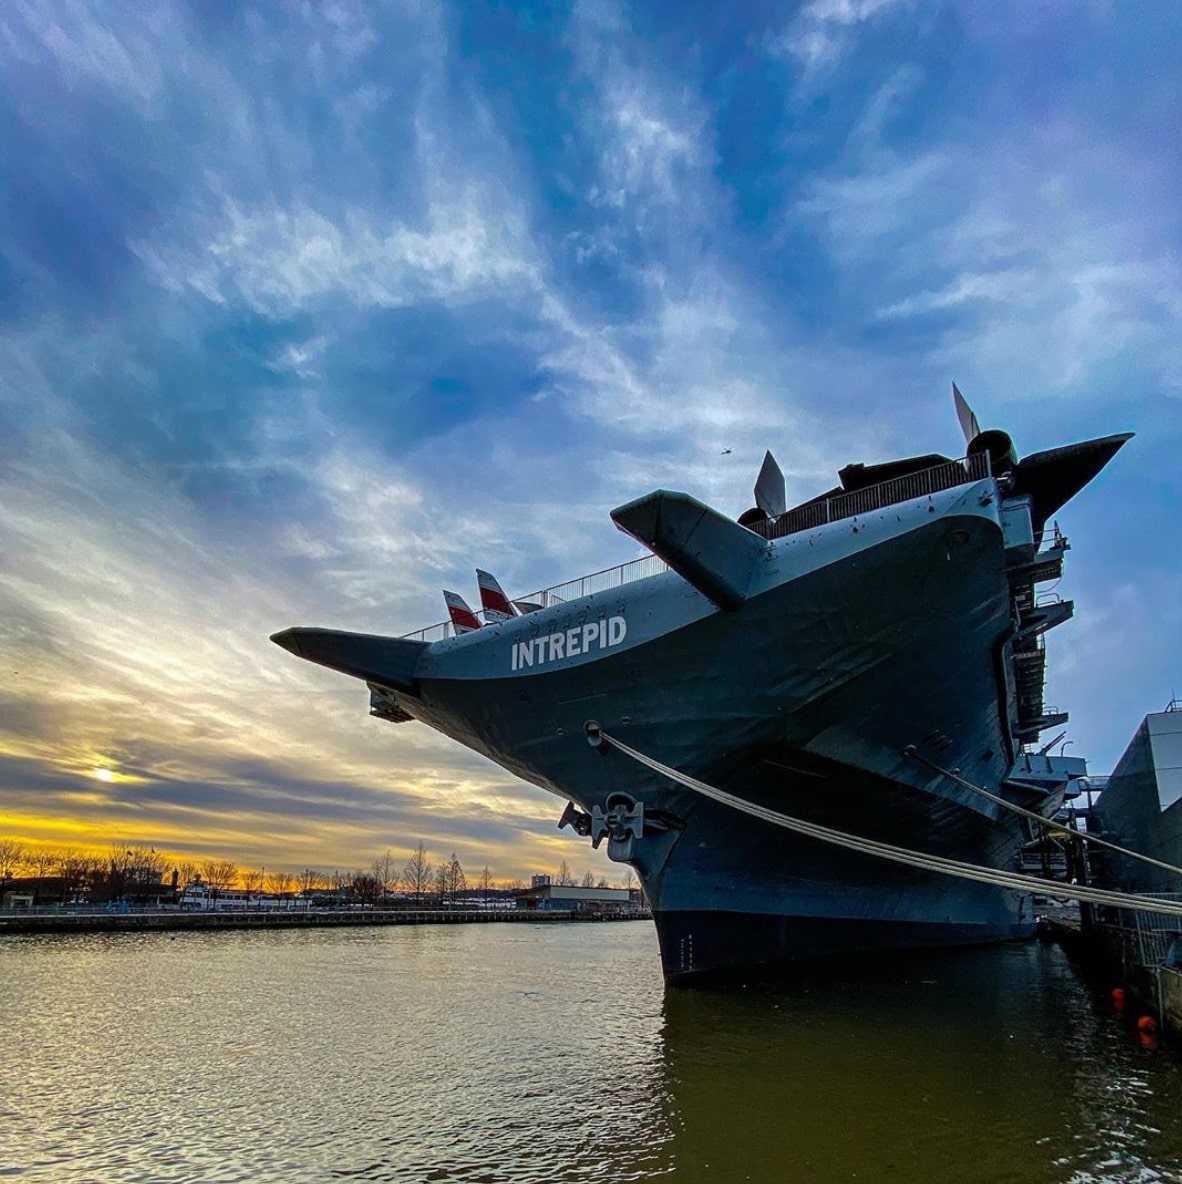 Visit the Intrepid Museum with Free Virtual Events